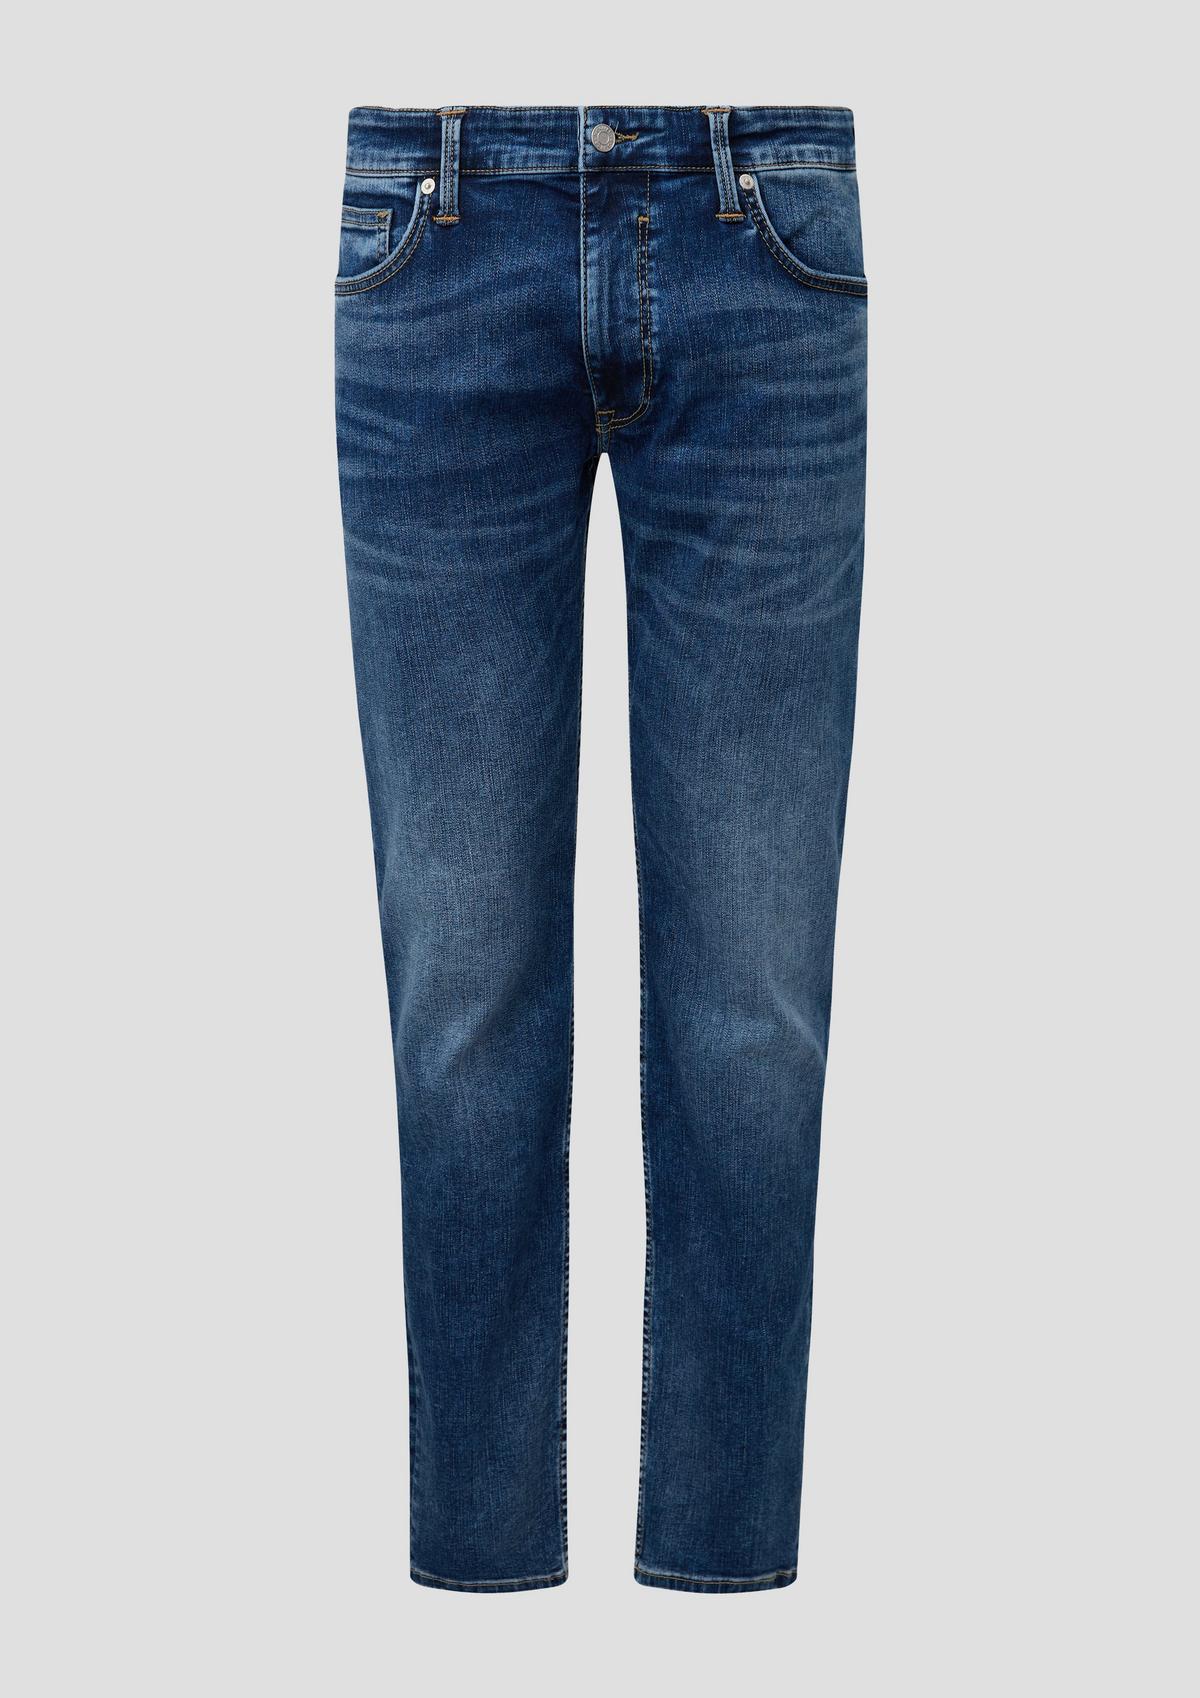 s.Oliver Jeans Keith / slim fit / mid rise / straight leg